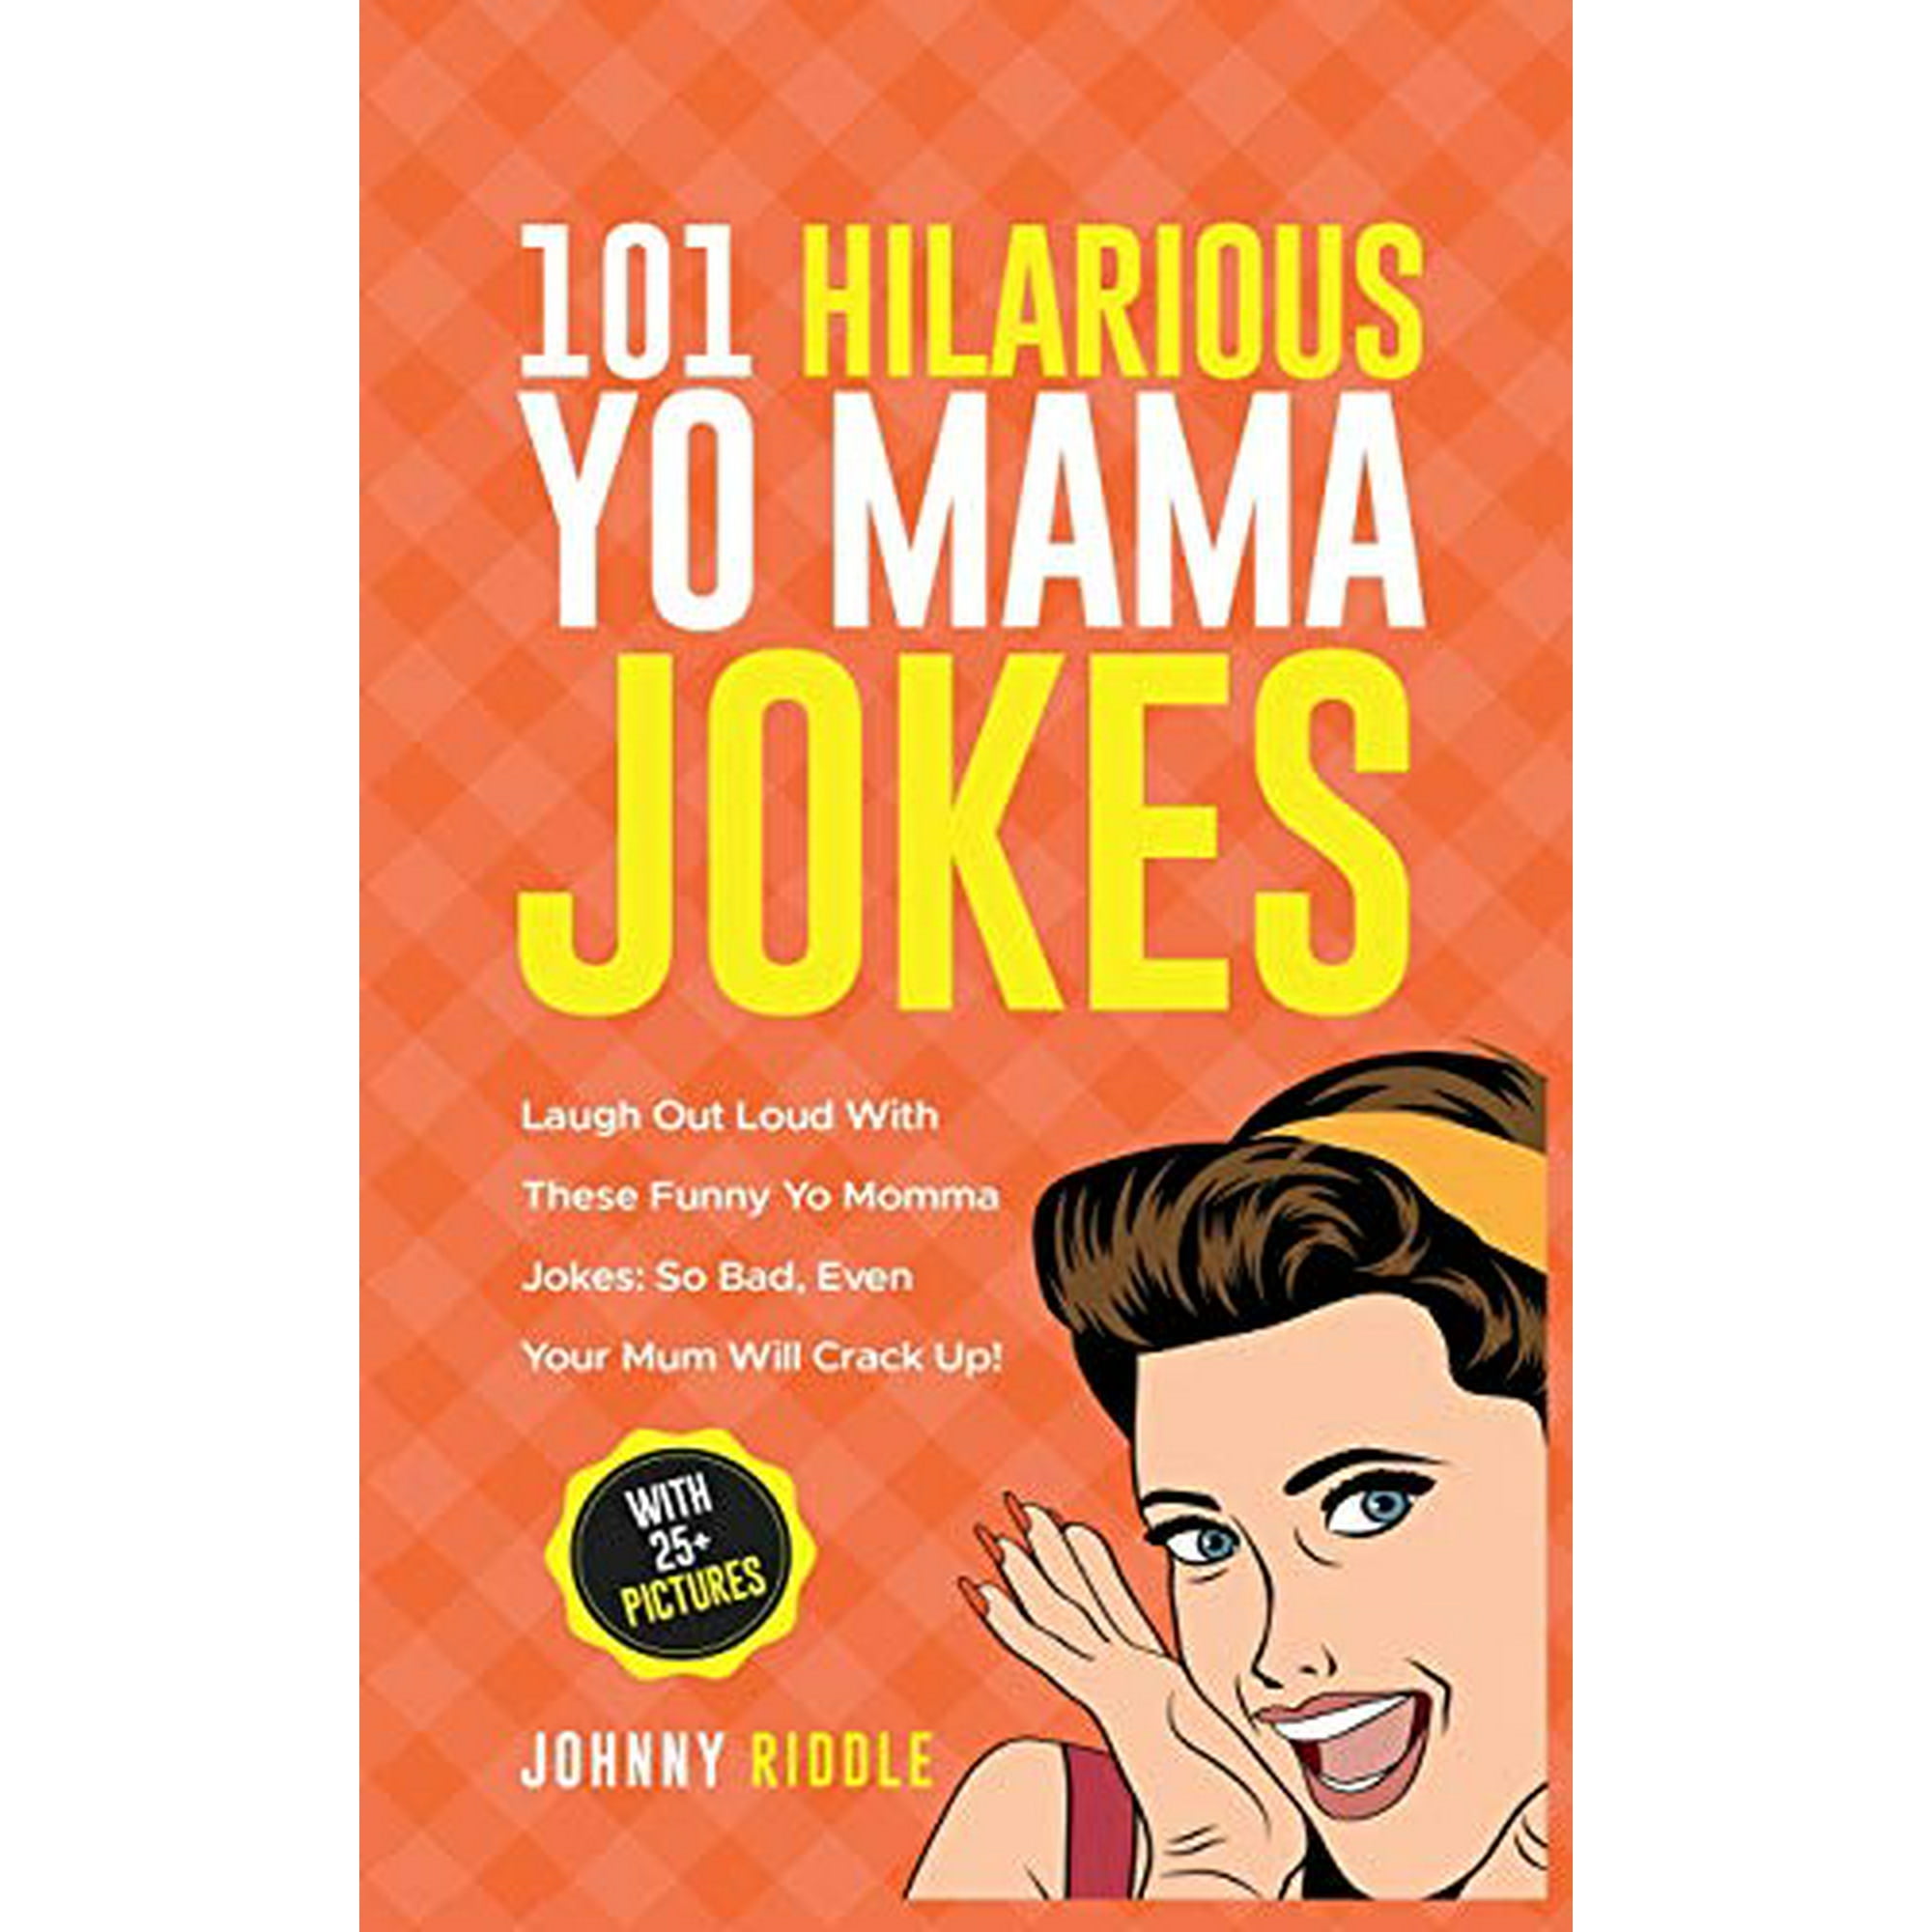 101 Hilarious Yo Mama Jokes: Laugh Out Loud With These Funny Yo Momma Jokes:  So Bad, Even Your Mum Will Crack Up! (WITH 25+ PICTURES) | Walmart Canada